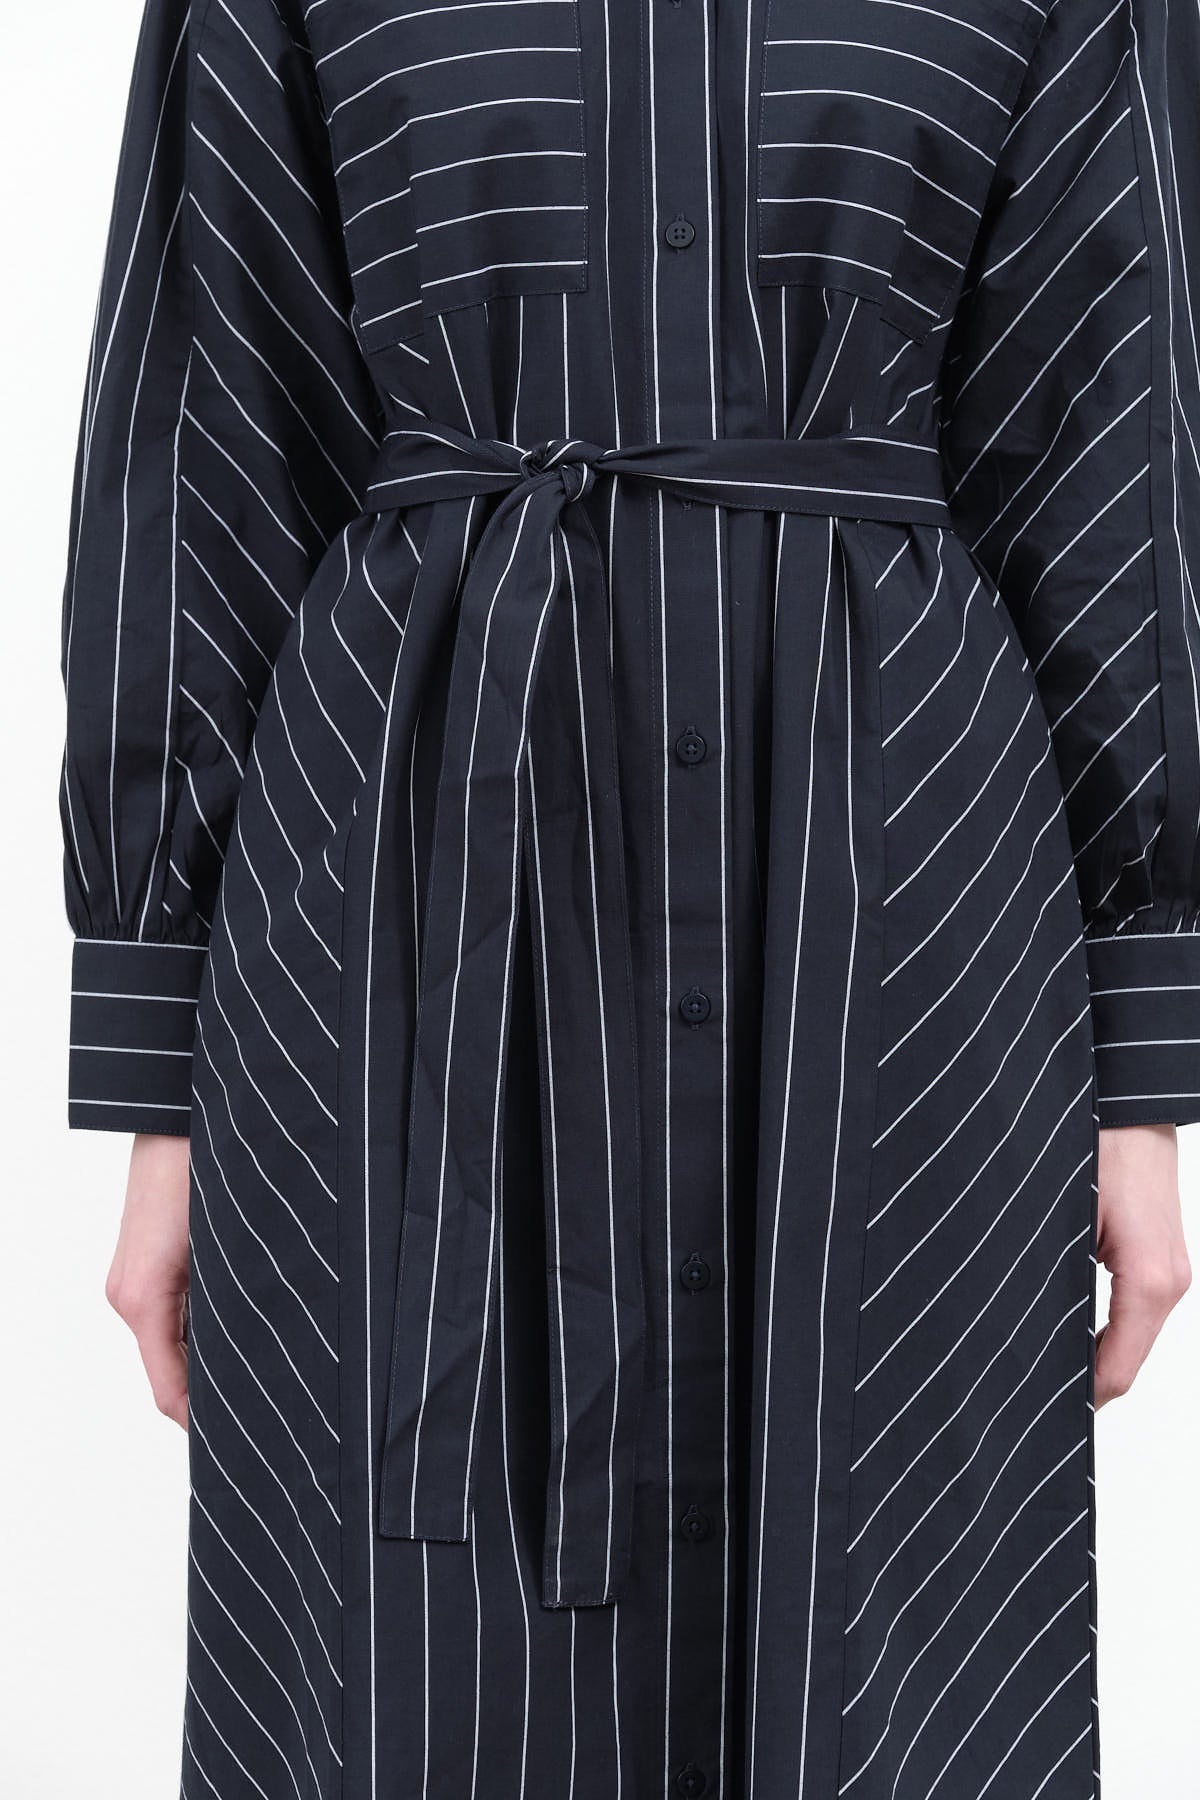 Yves Button Up Shirt Dress with Matching Tie Belt in Navy Pinstripe by Kowtow